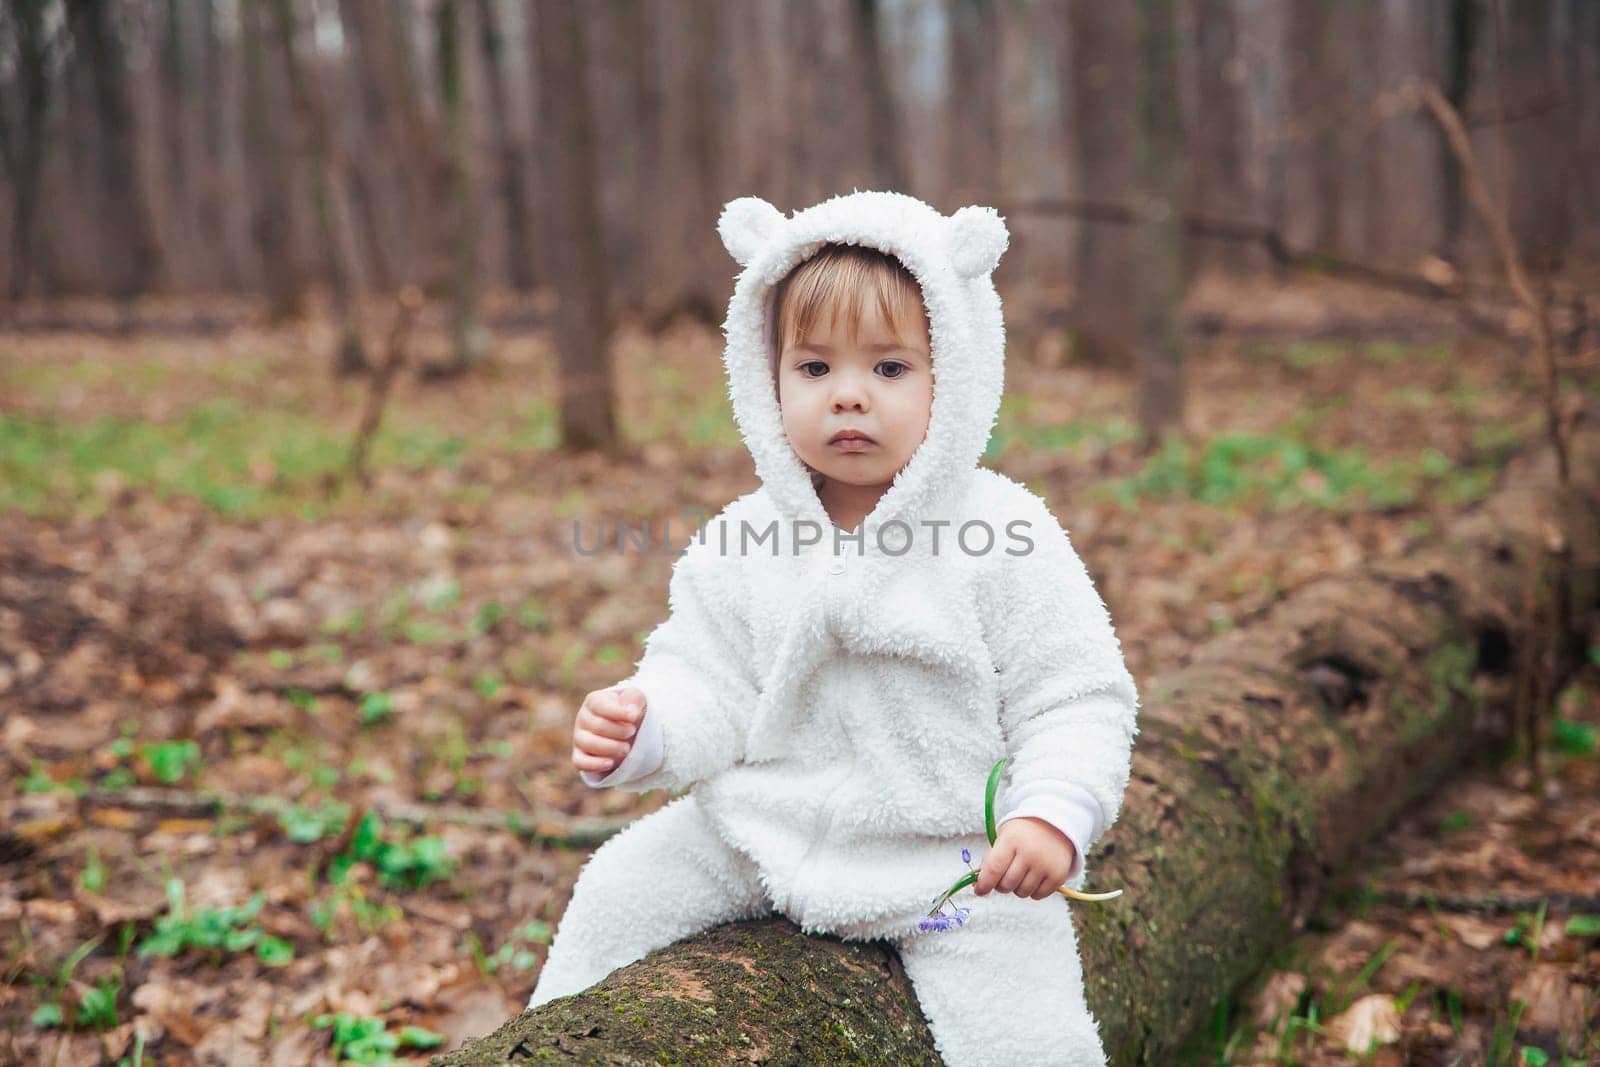 Adorable baby in a bear costume in the forest by a fallen tree.